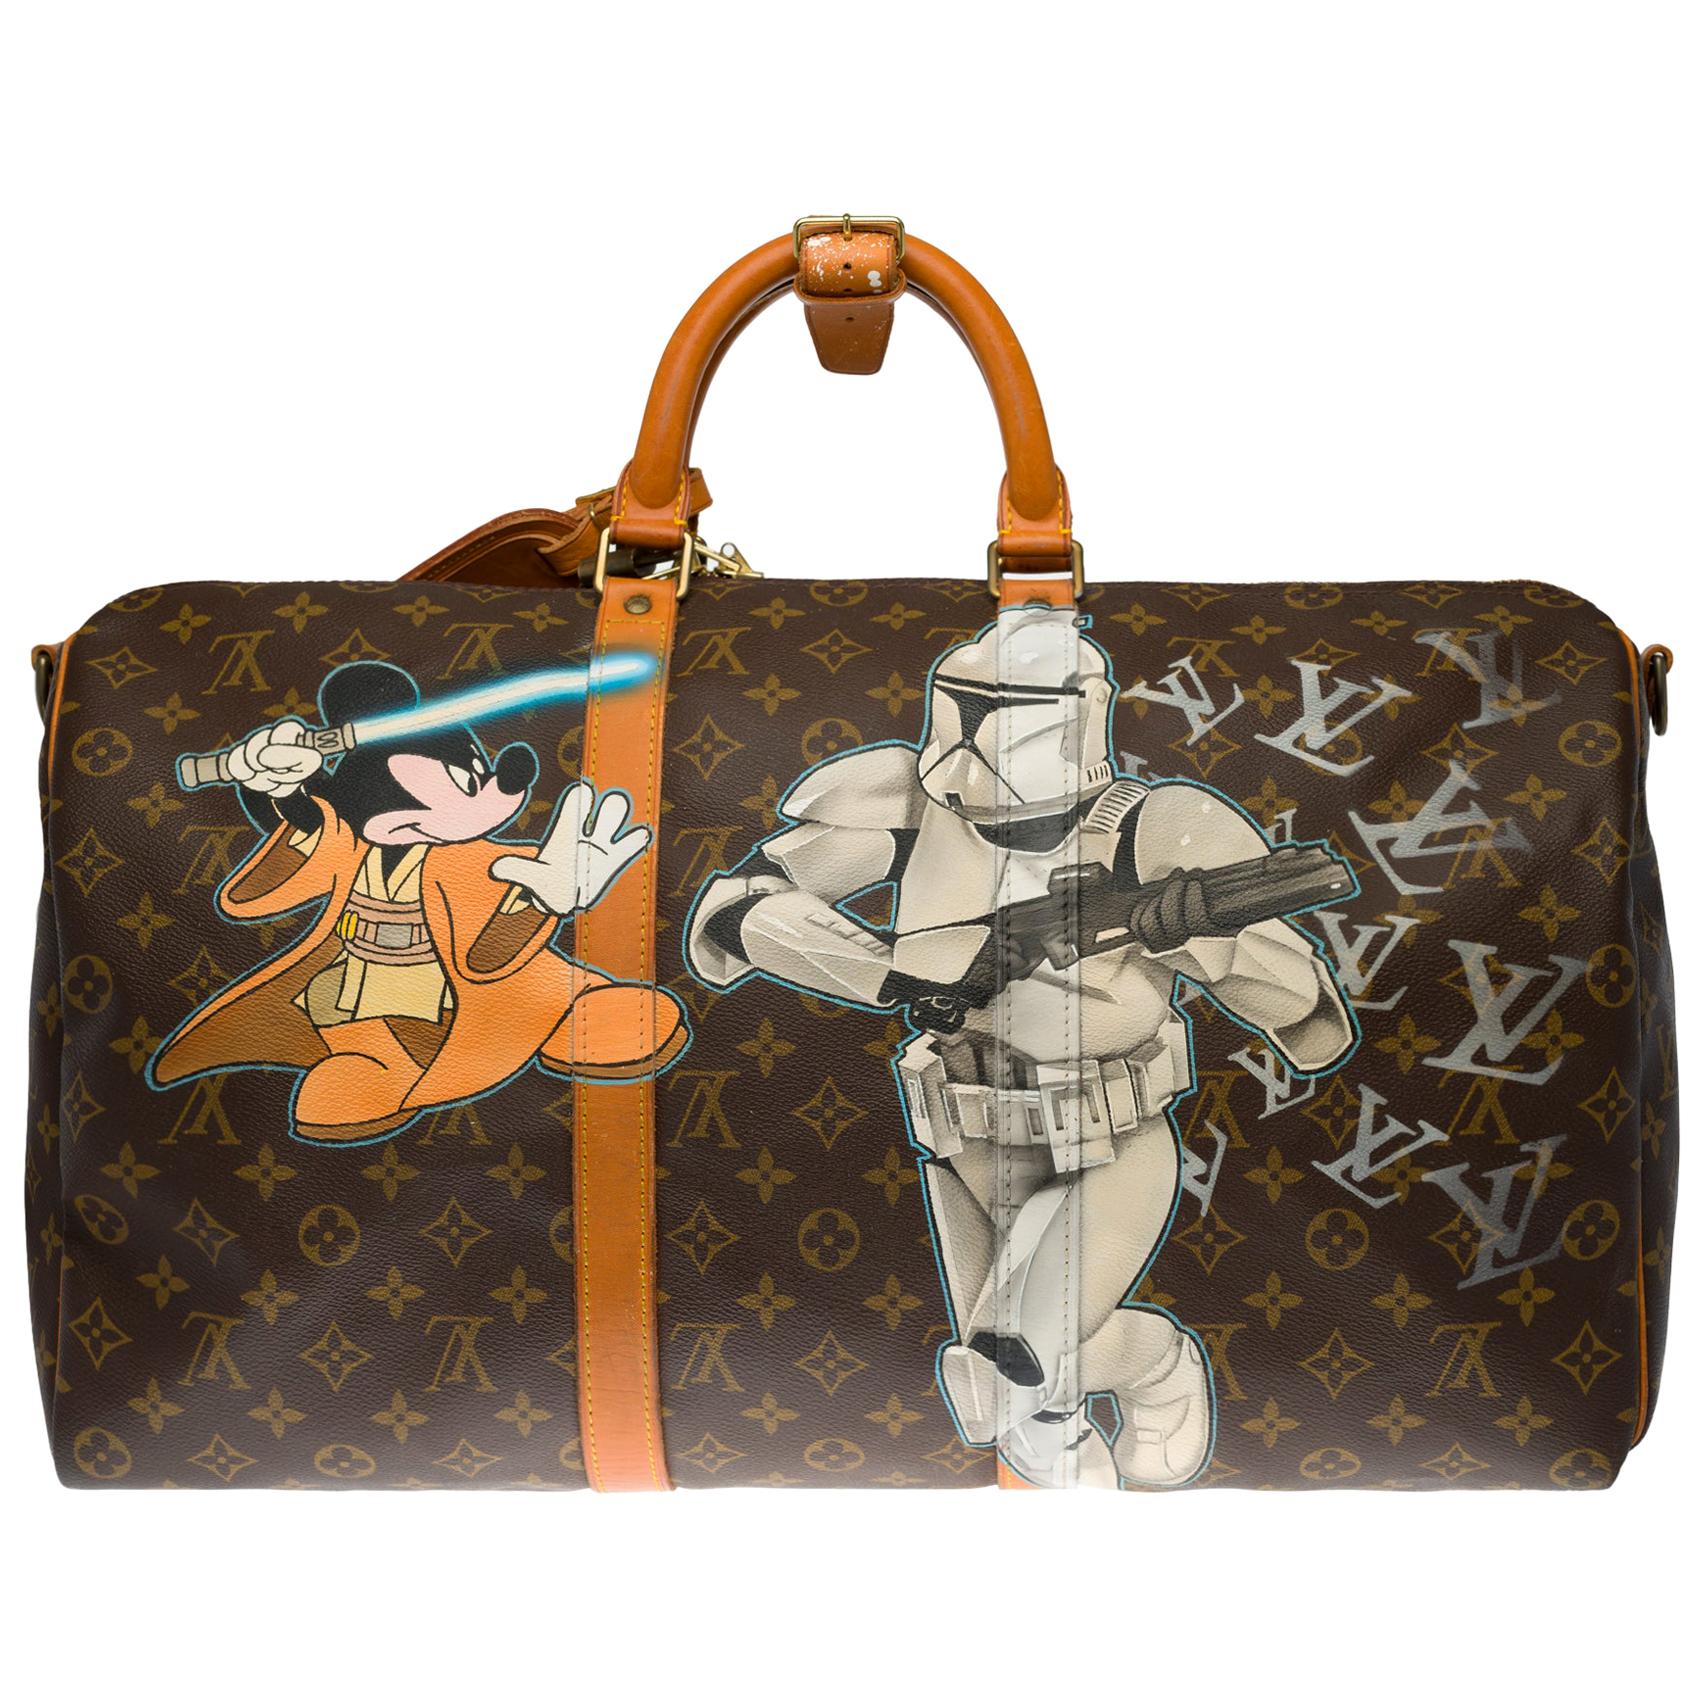 Customized "Mickey Vs Stormstrooper" Louis Vuitton Keepall 50 travel bag